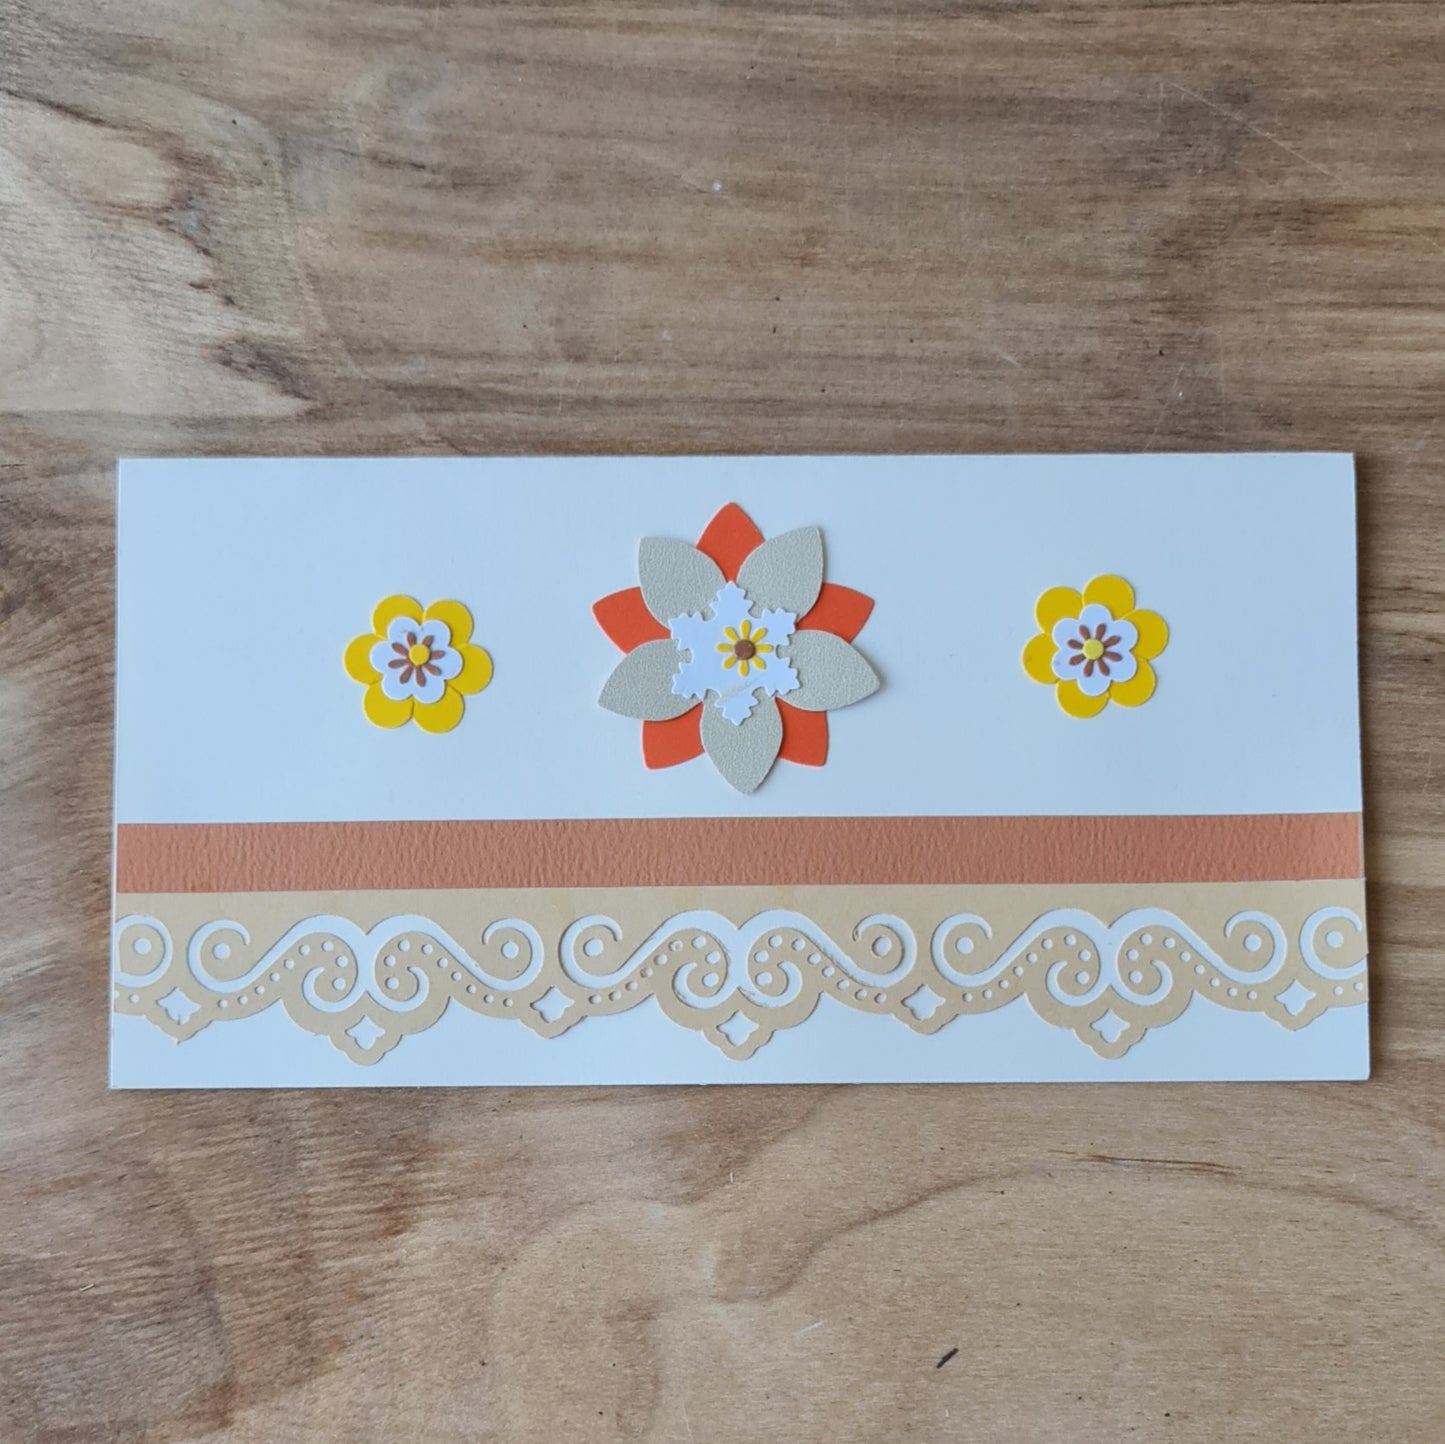 Paper card 3D on a light background with brown/orange/yellow floral elements and a decorative line 21 x 10.5 cm (AMA)